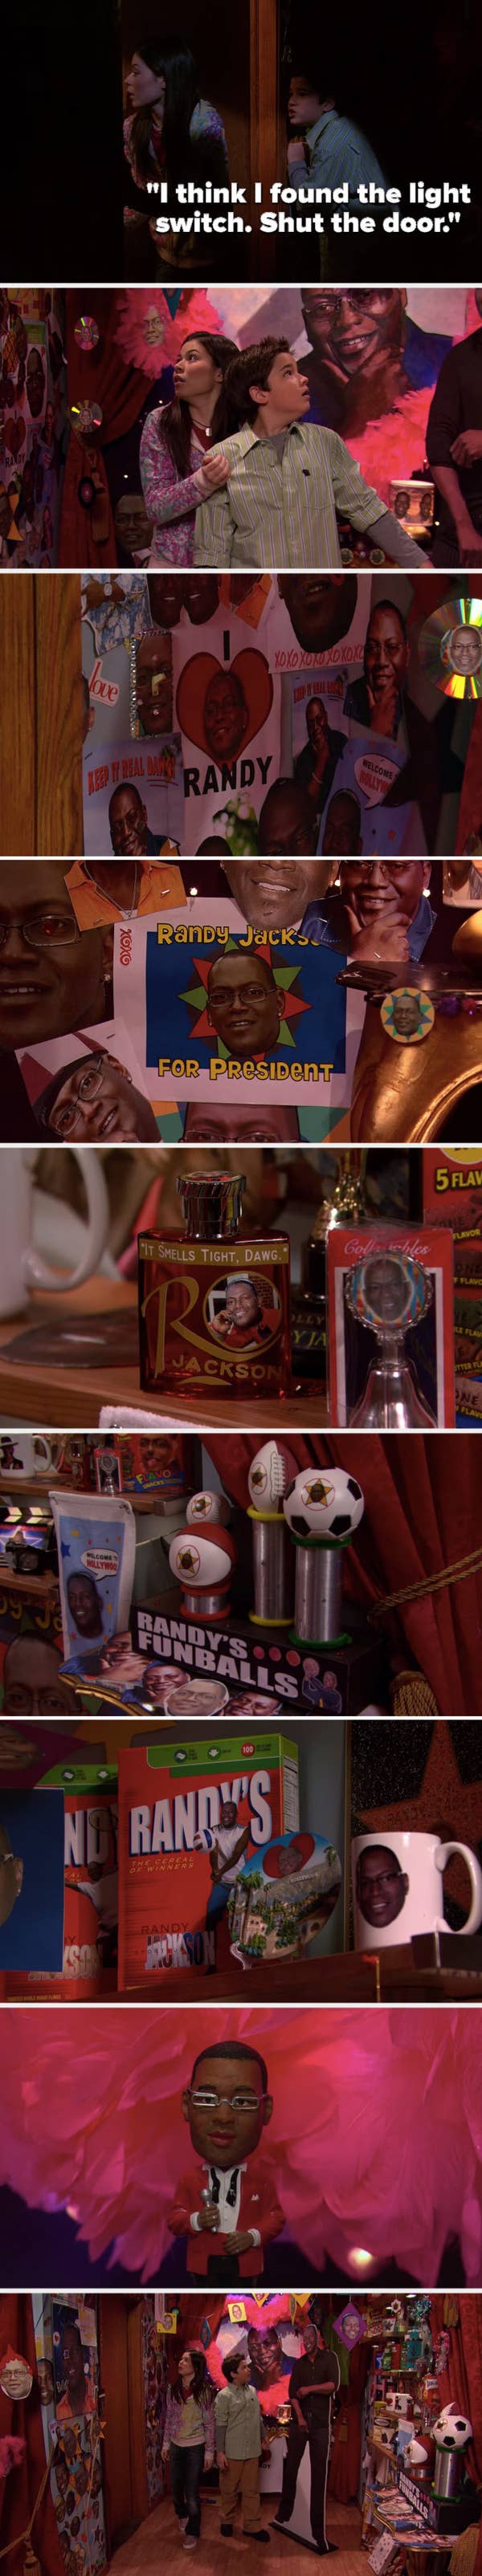 Freddie says, &quot;I think I found the light switch. Shut the door,&quot; and he and Carly realize they&#x27;re in a closet full of pictures of Randy Jackson and Randy Jackson paraphernalia